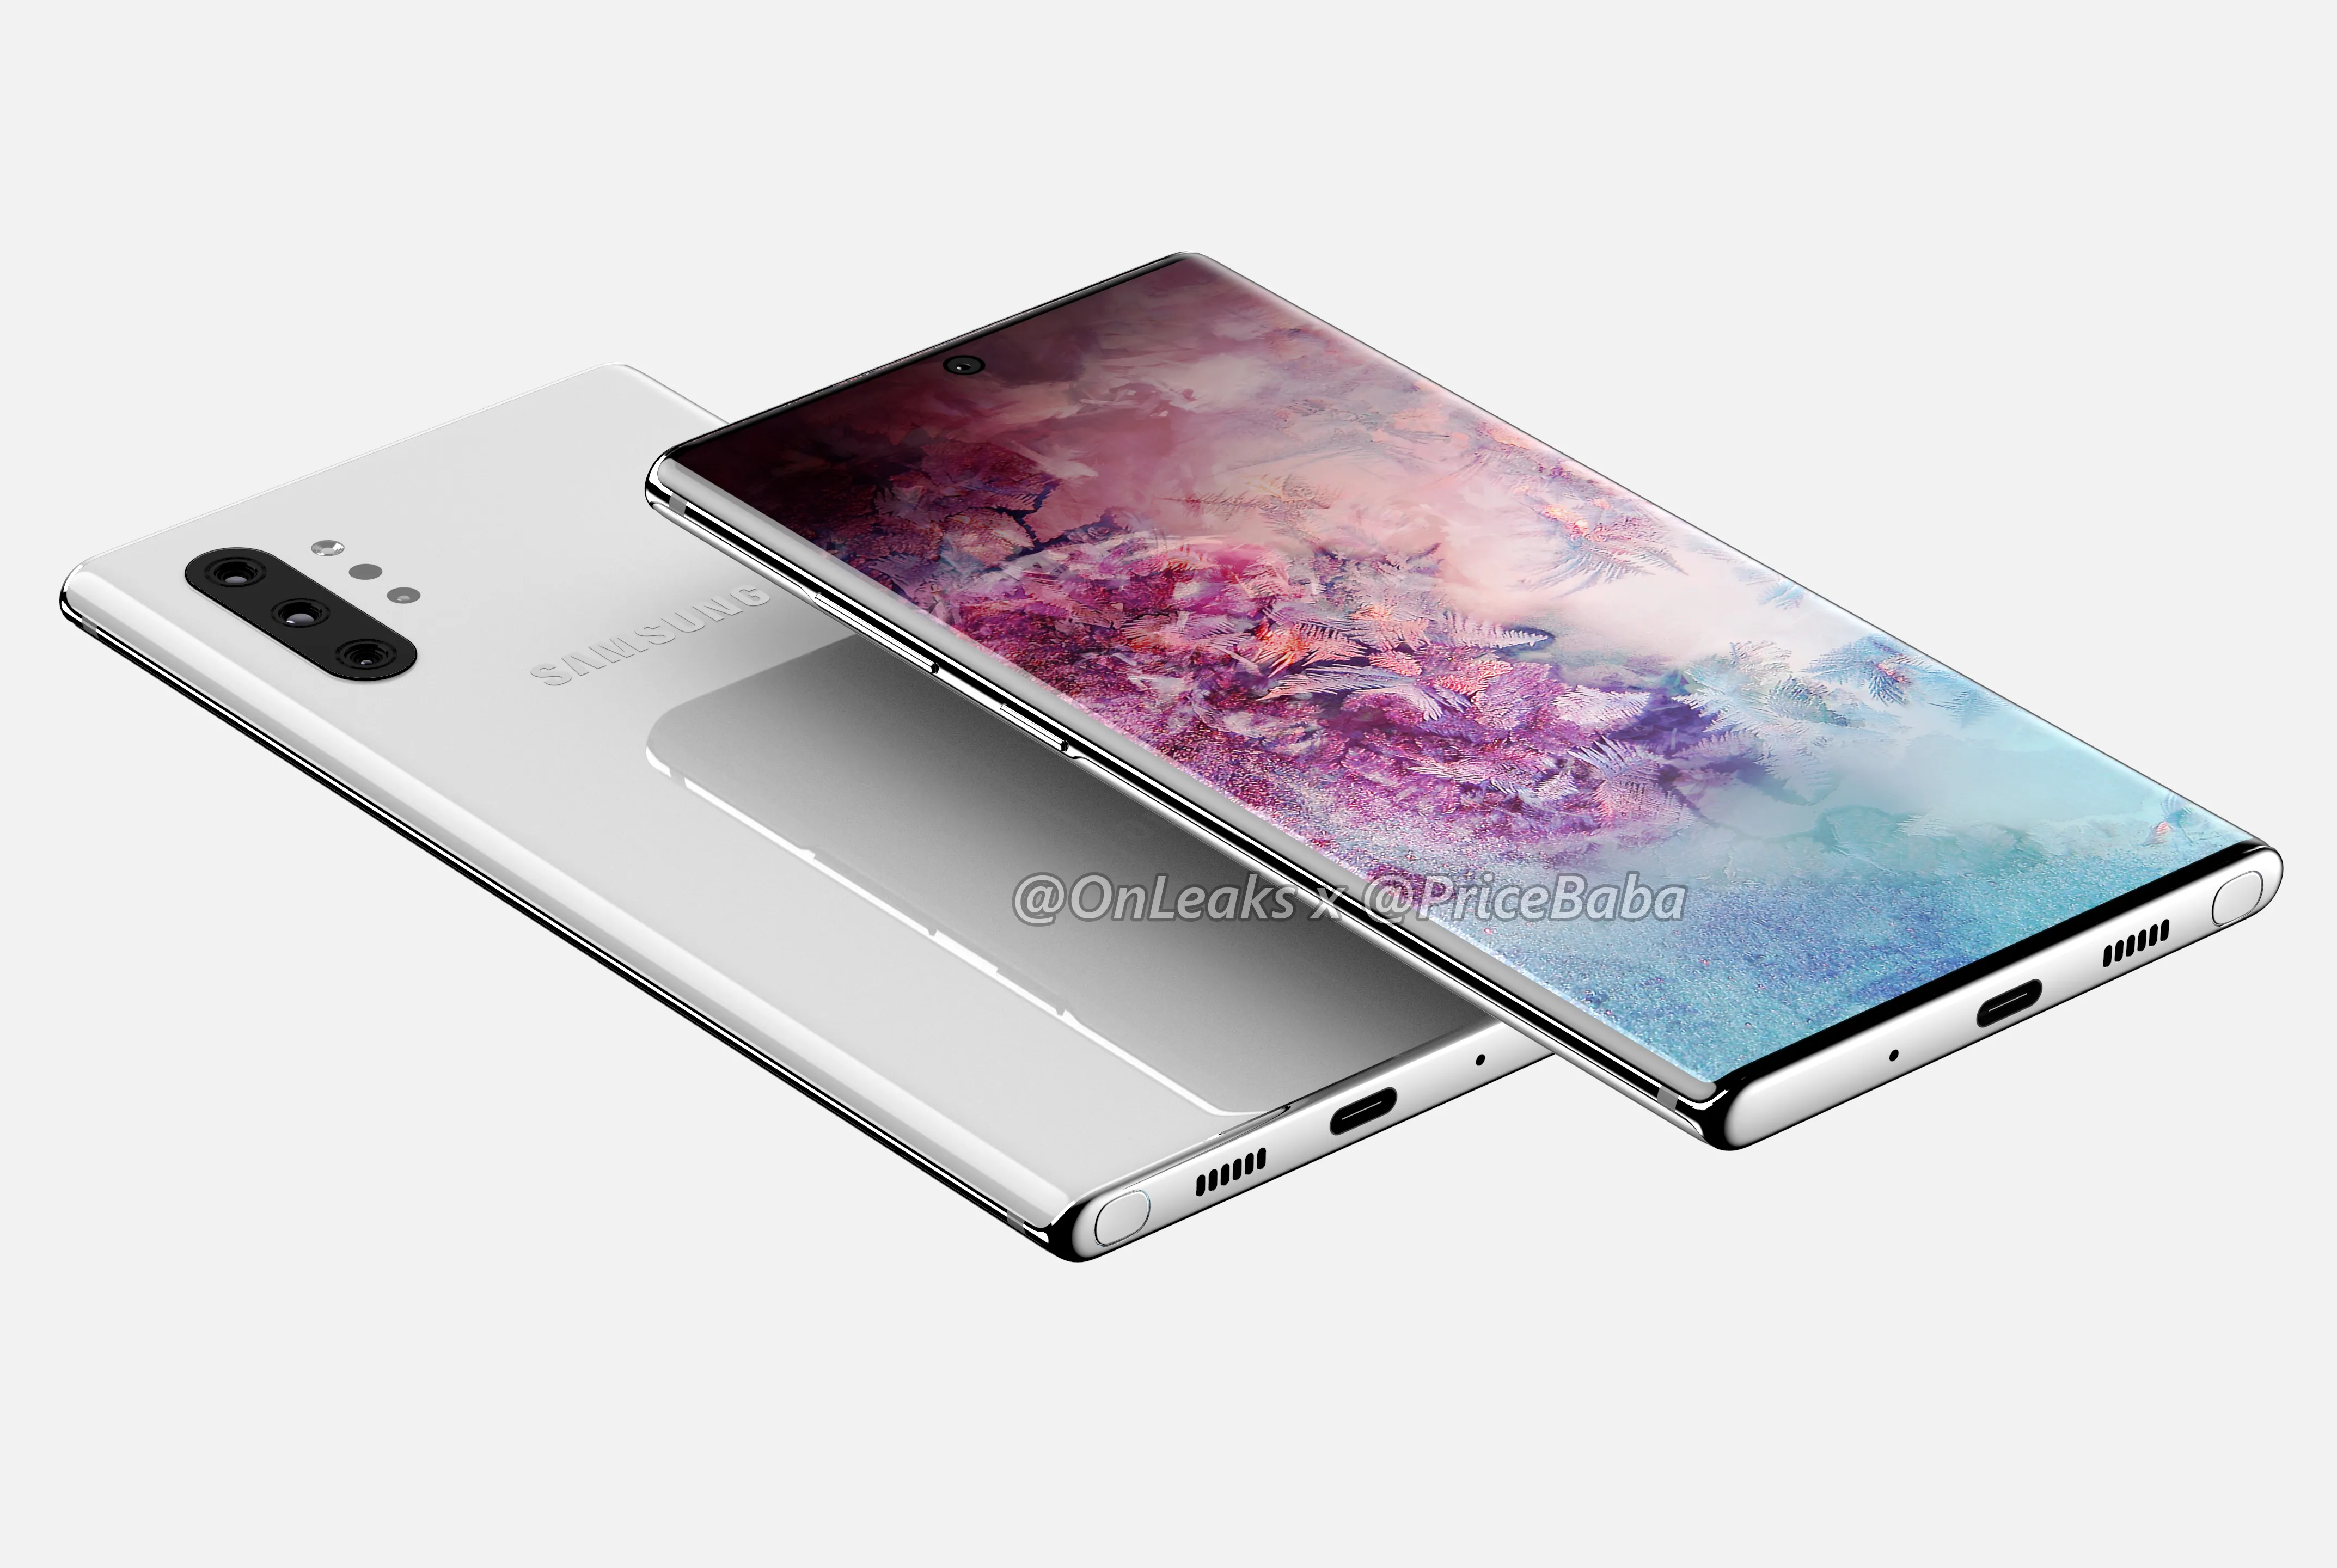 The Samsung Galaxy Note 10 may be yet another step in the wrong